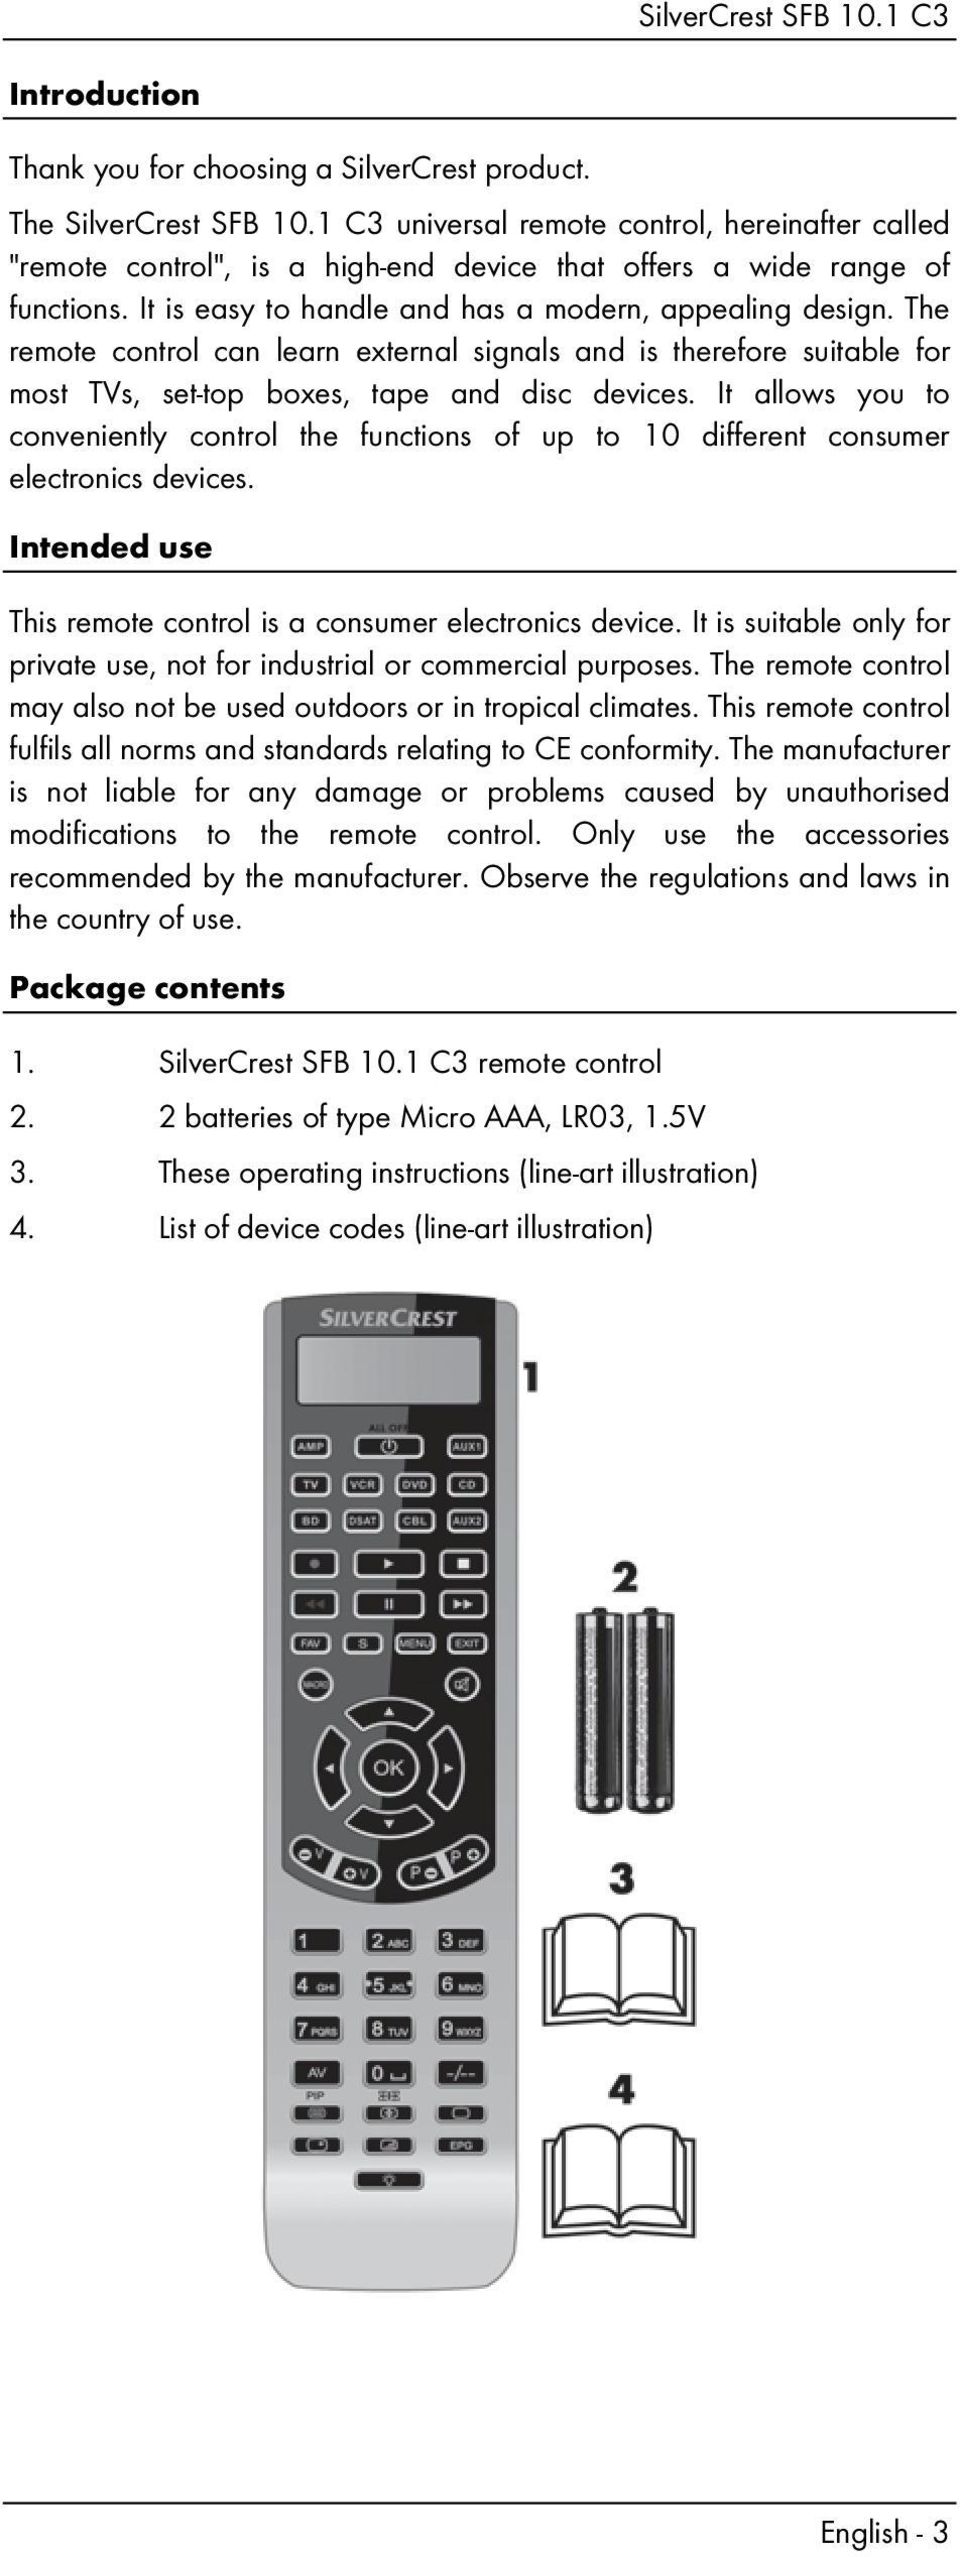 The remote control can learn external signals and is therefore suitable for most TVs, set-top boxes, tape and disc devices.